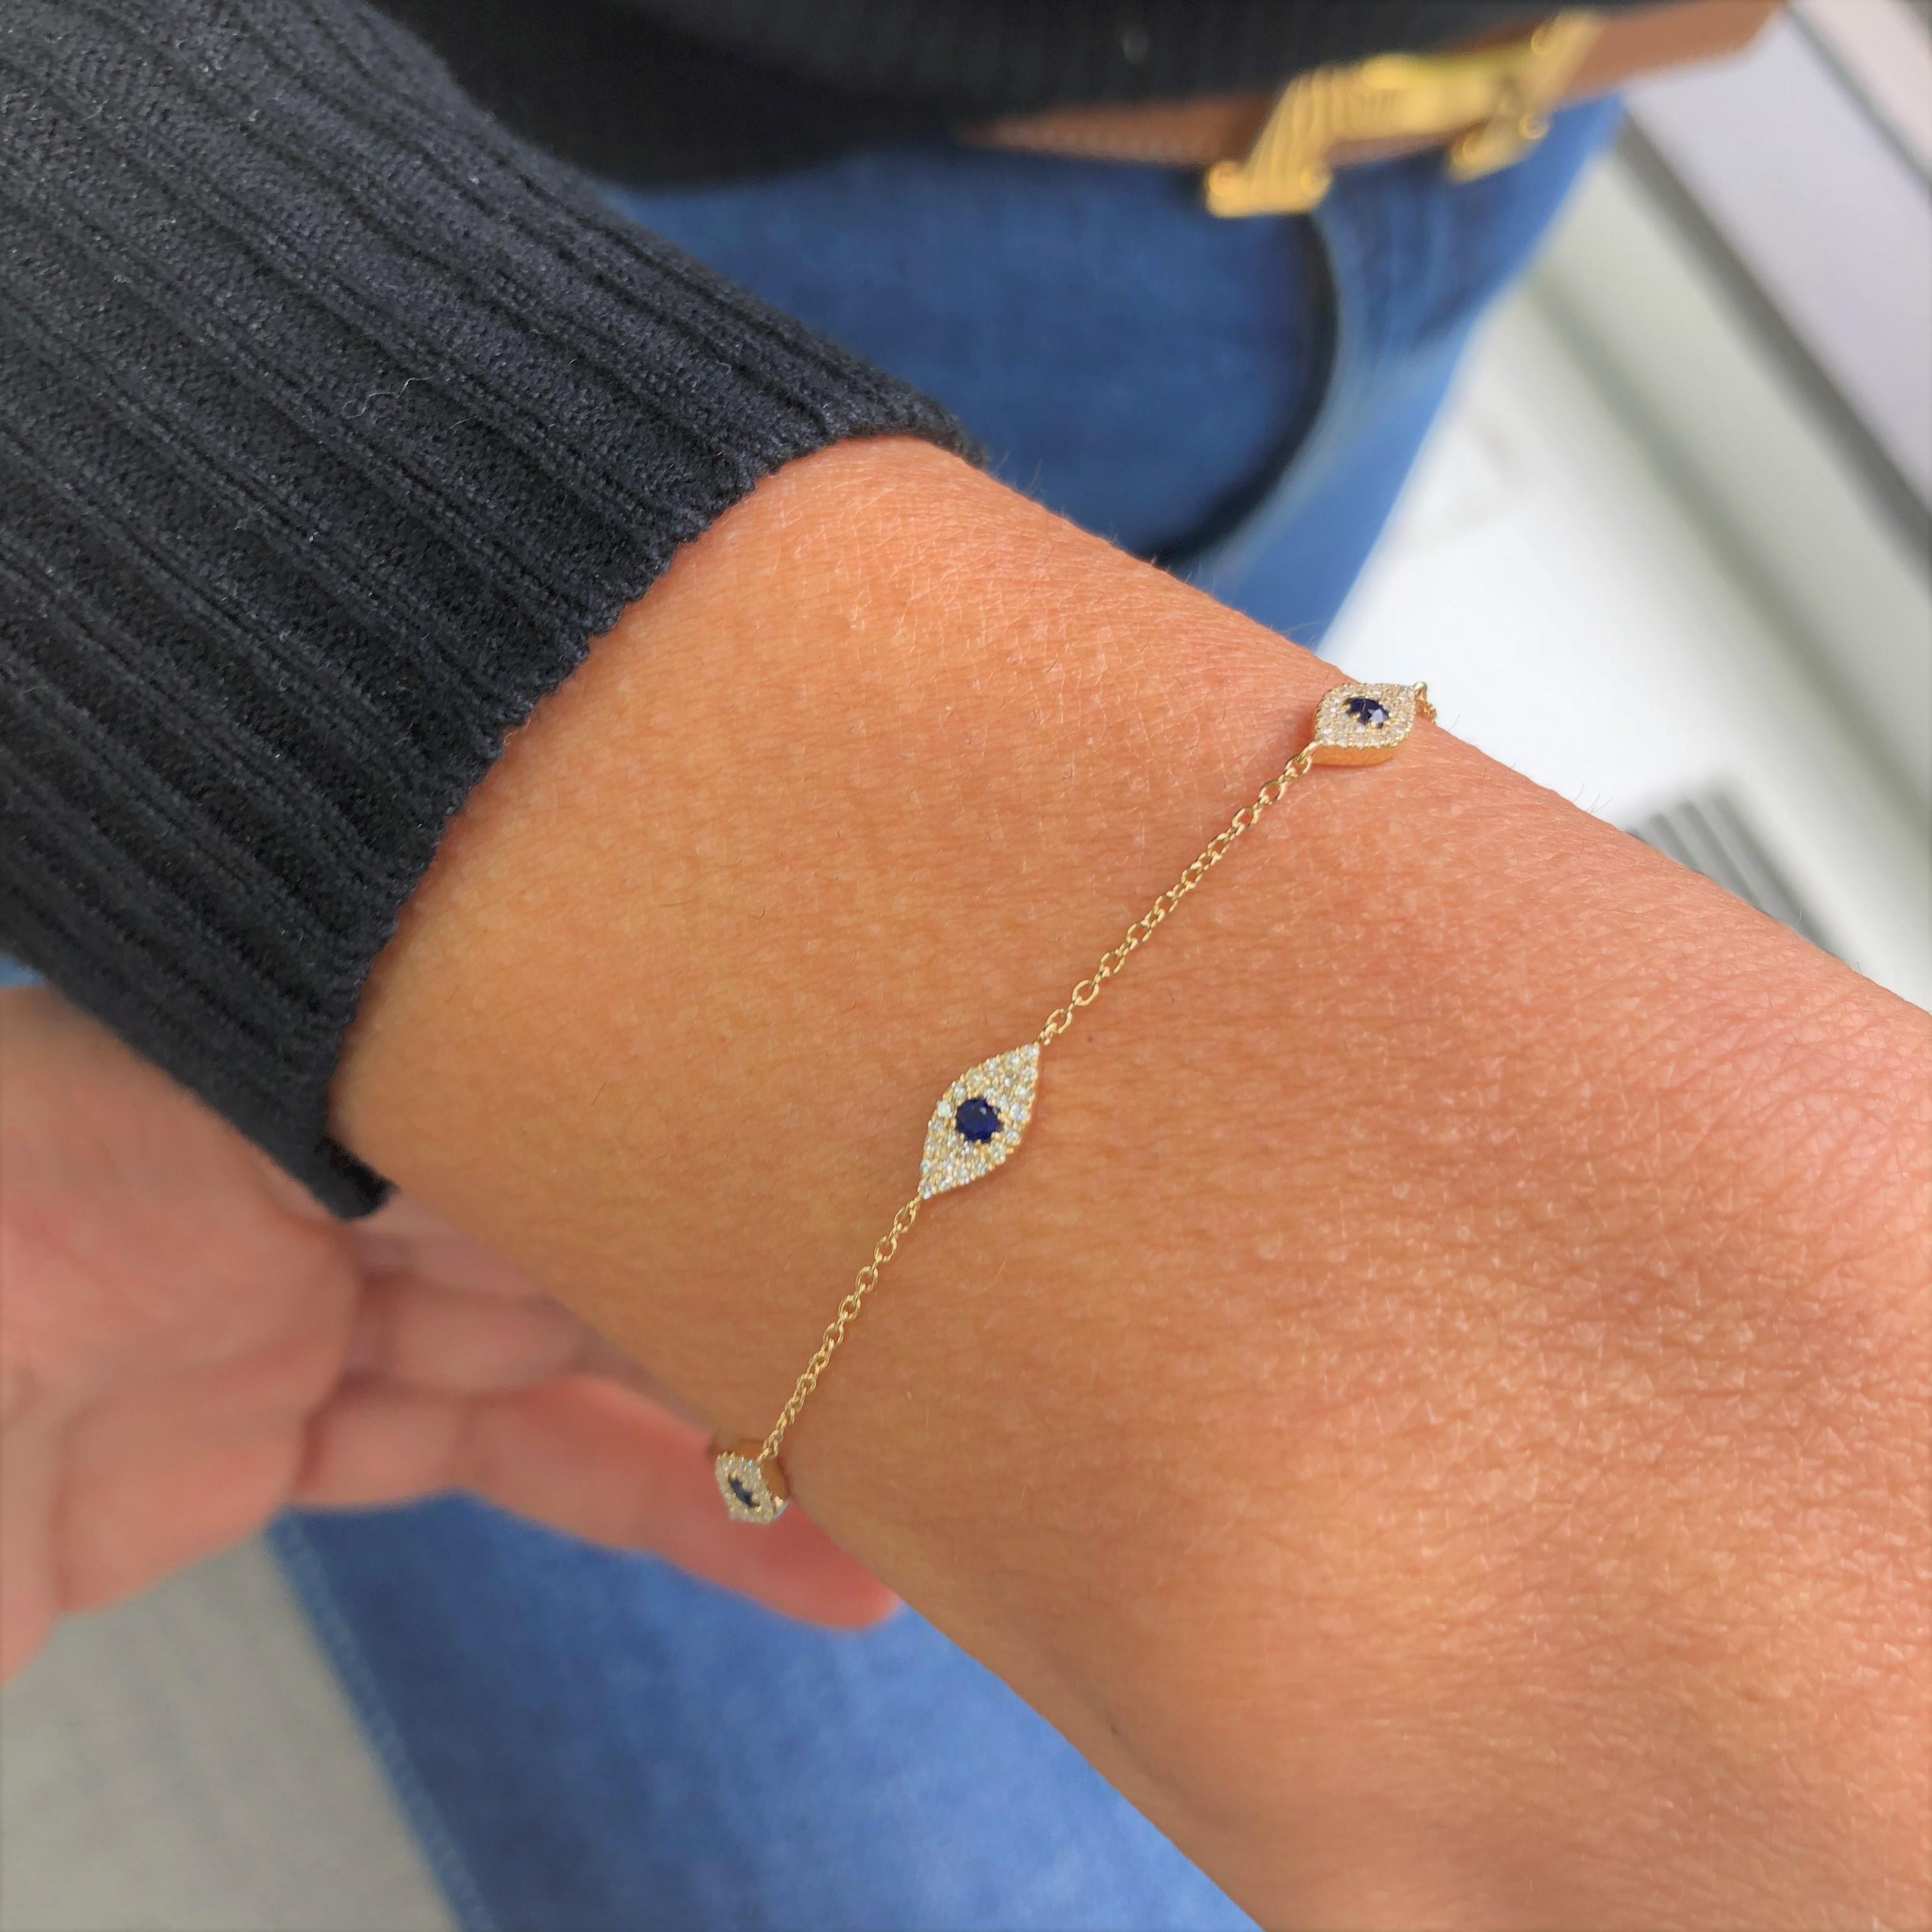 Add this station Evil Eye bracelet to your look! Crafted of 14k Gold and 0.26 ct of Round Sparkly natural Diamonds and 0.27 ct of shiny blue sapphires. Diamond Color and Clarity GH-SI1-SI2.  Bracelet is adjustable up to 7